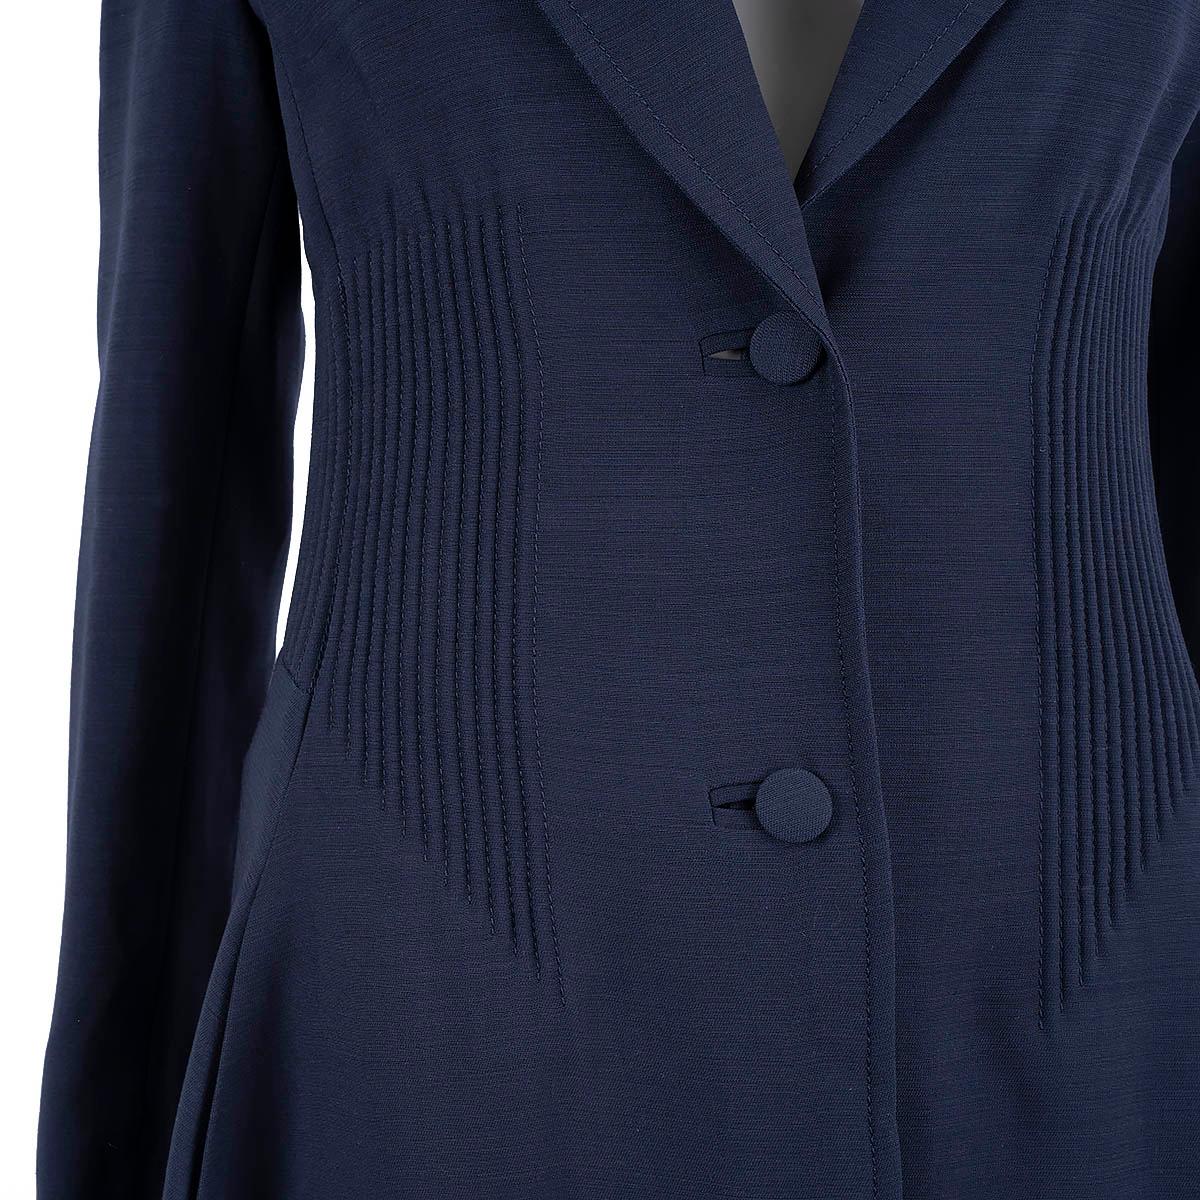 GABRIELA HEARST navy blue wool 2019 ALFONSO LONG Coat Jacket 2 XS In Excellent Condition For Sale In Zürich, CH